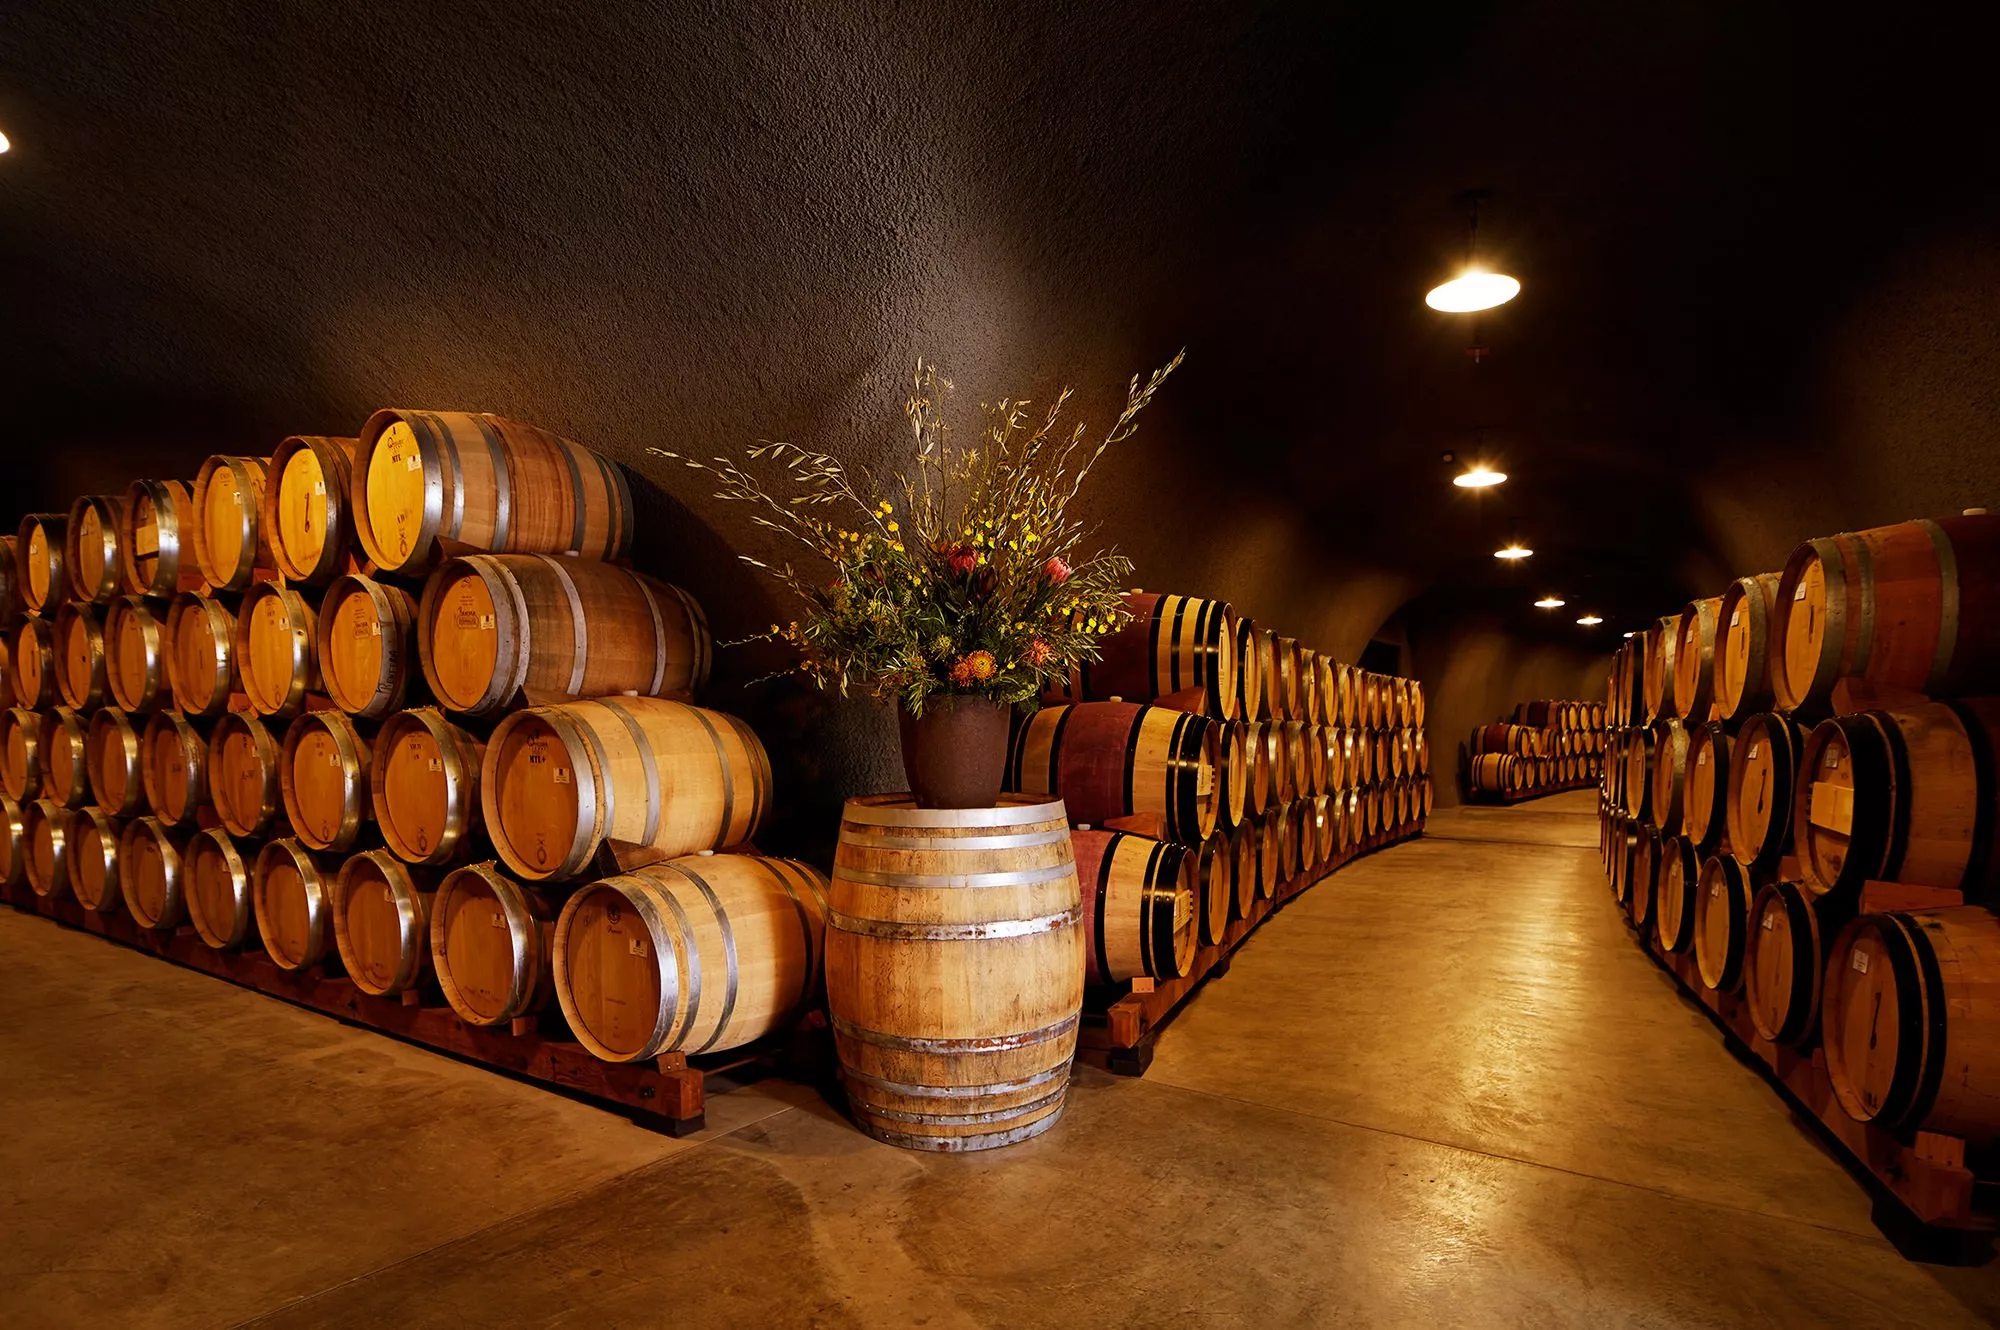 Matosevic Winery in Croatia, Europe | Wineries - Rated 0.9